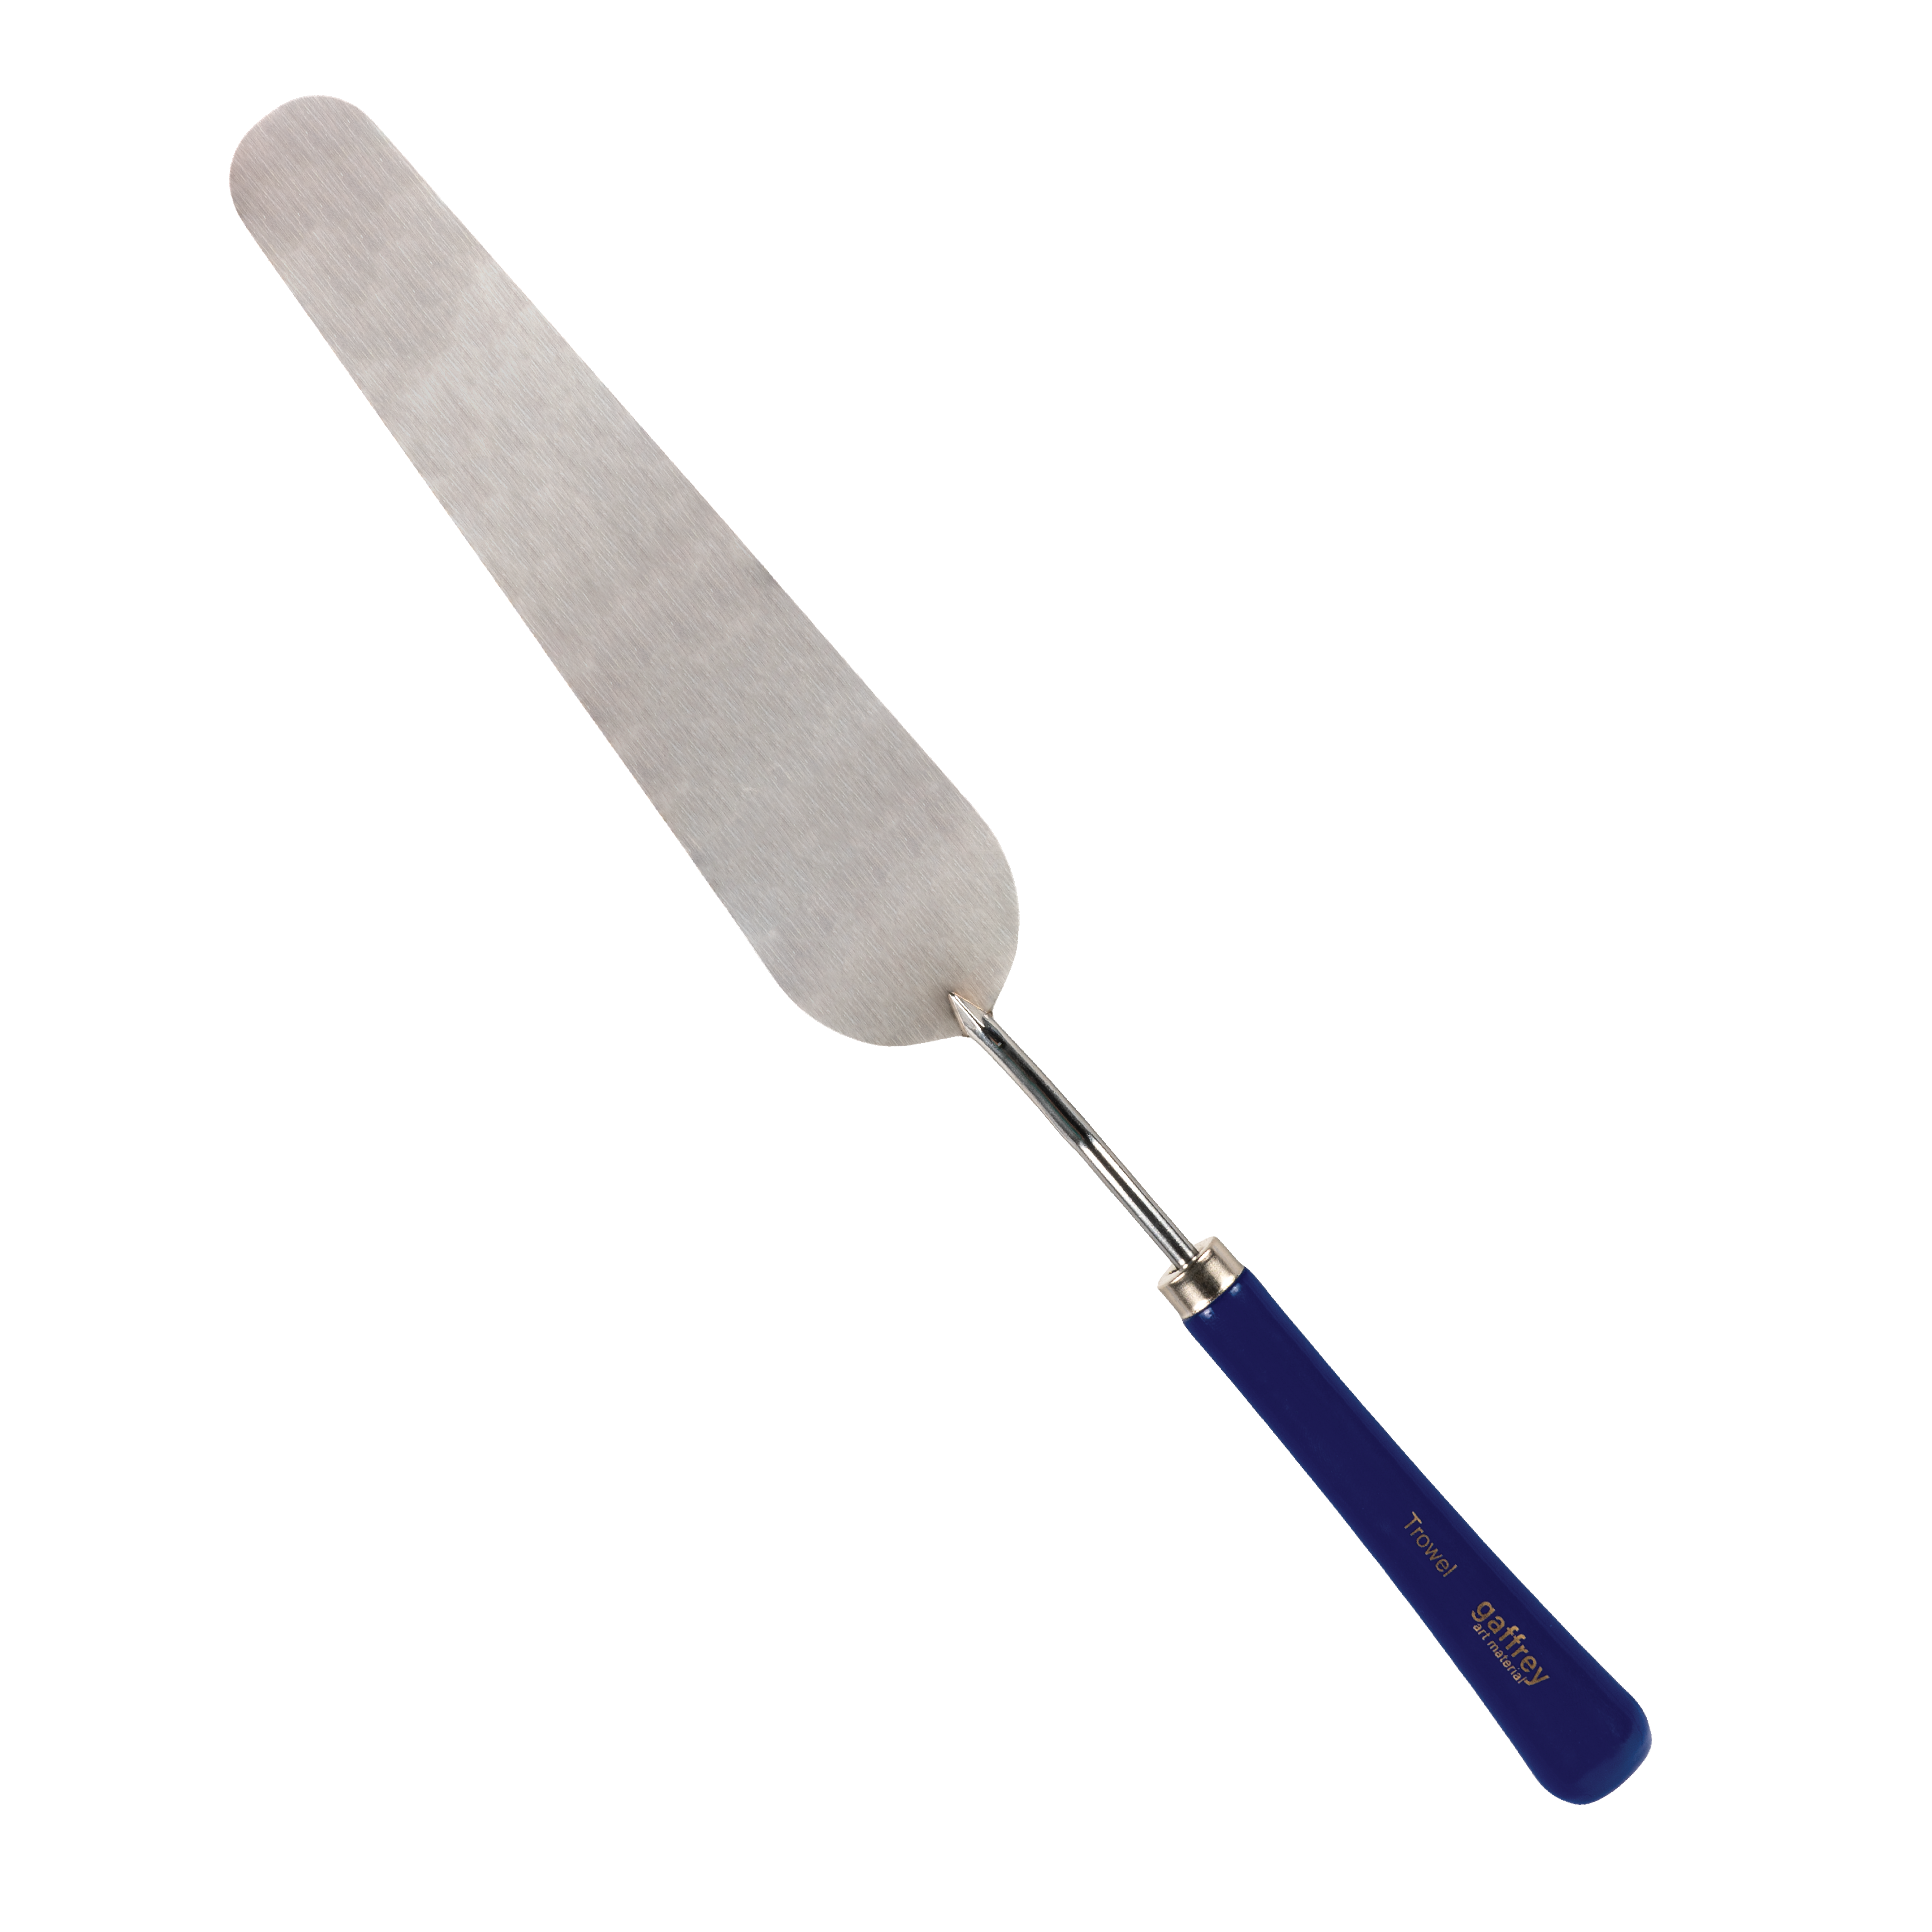 Painting & Palette Knife 3-1/8 Trowel #830 - Brushes and More